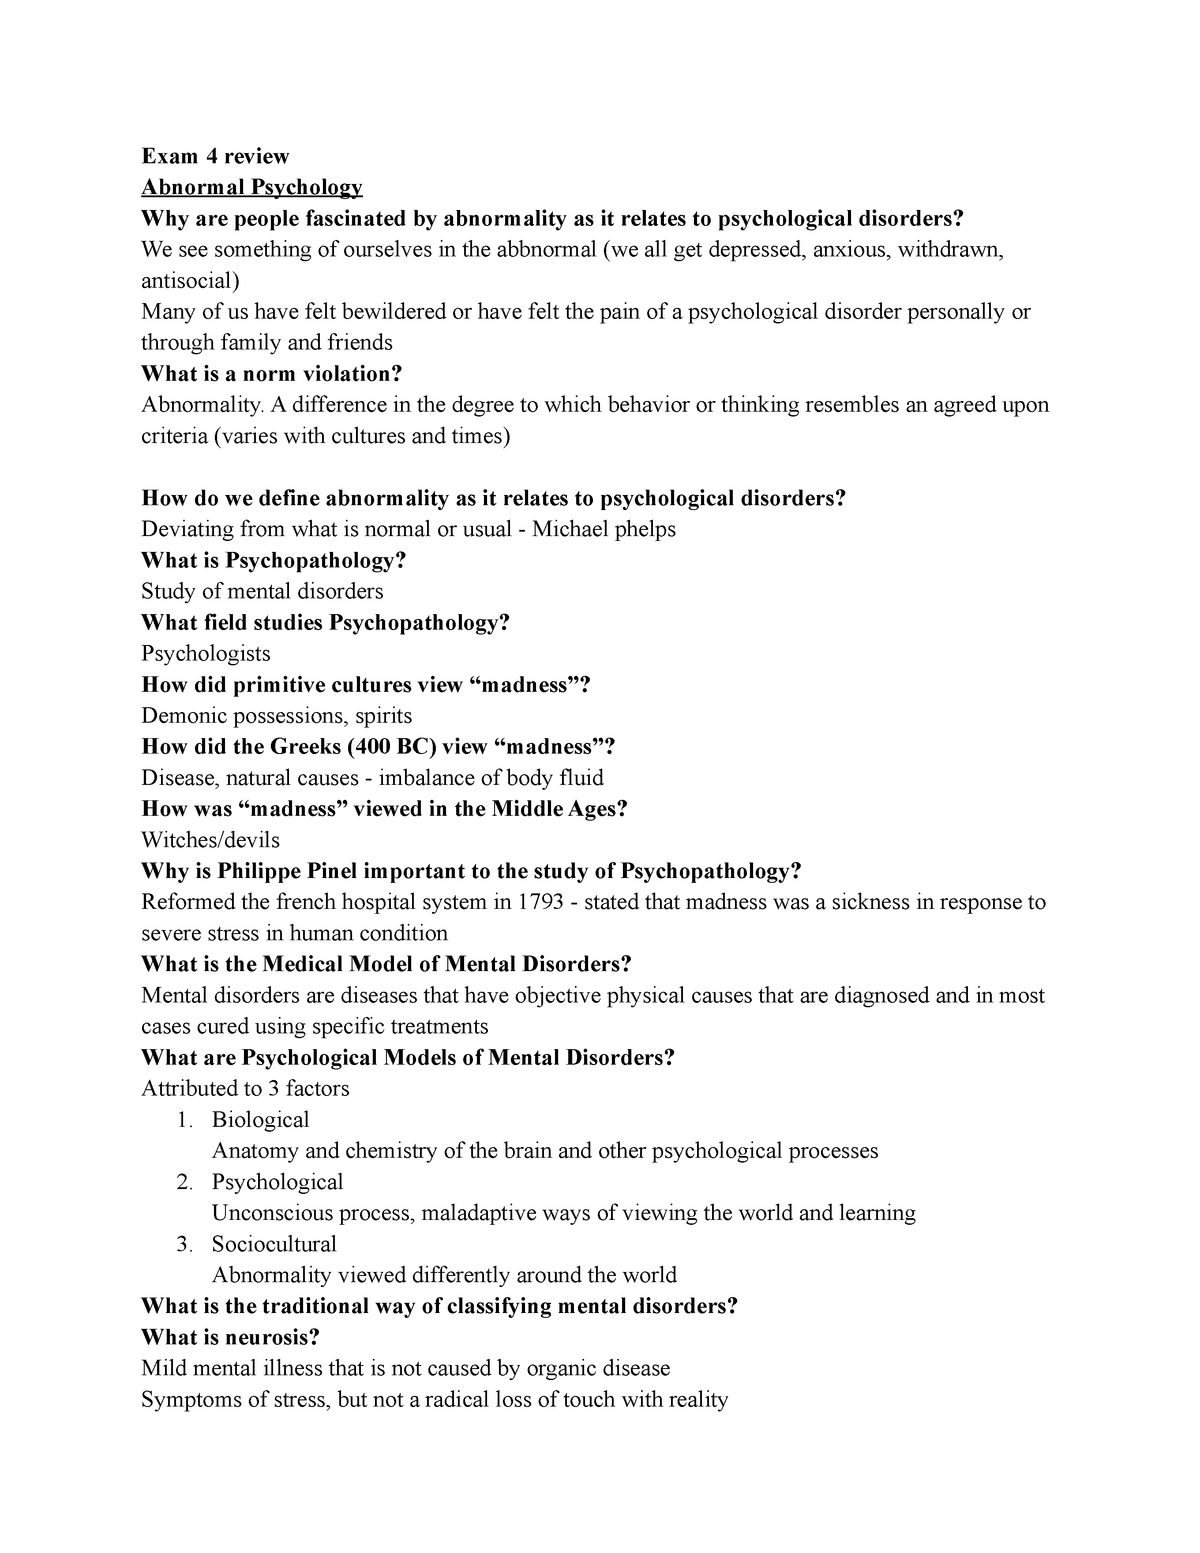 Psy100 Exam 4 Review Sheet - Exam 4 review Abnormal Psychology Why are ...